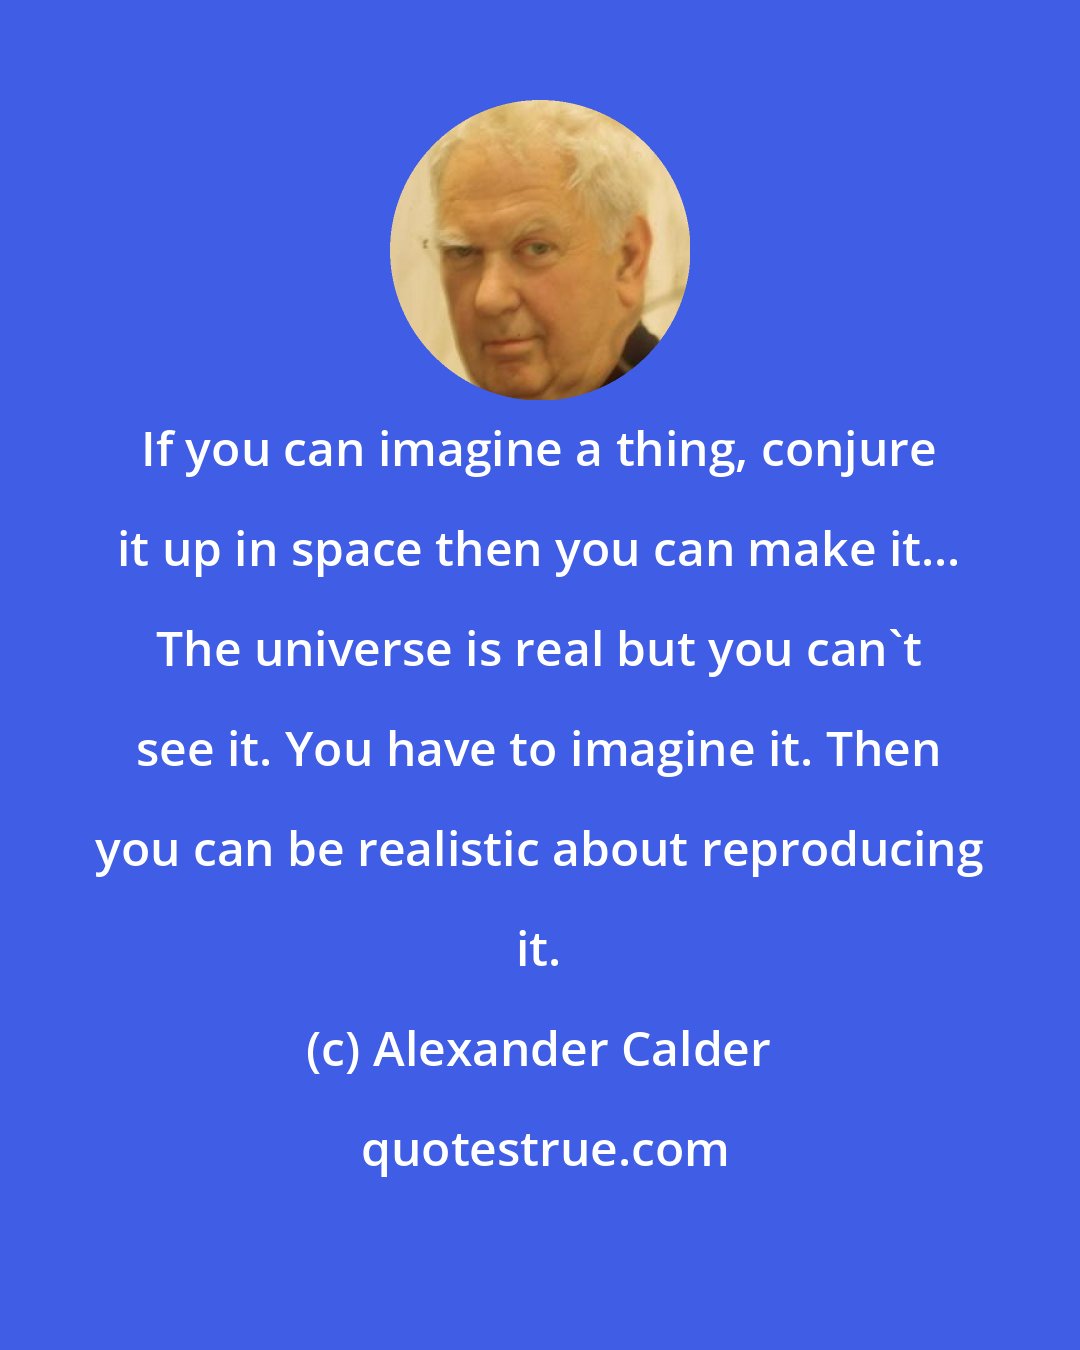 Alexander Calder: If you can imagine a thing, conjure it up in space then you can make it... The universe is real but you can't see it. You have to imagine it. Then you can be realistic about reproducing it.